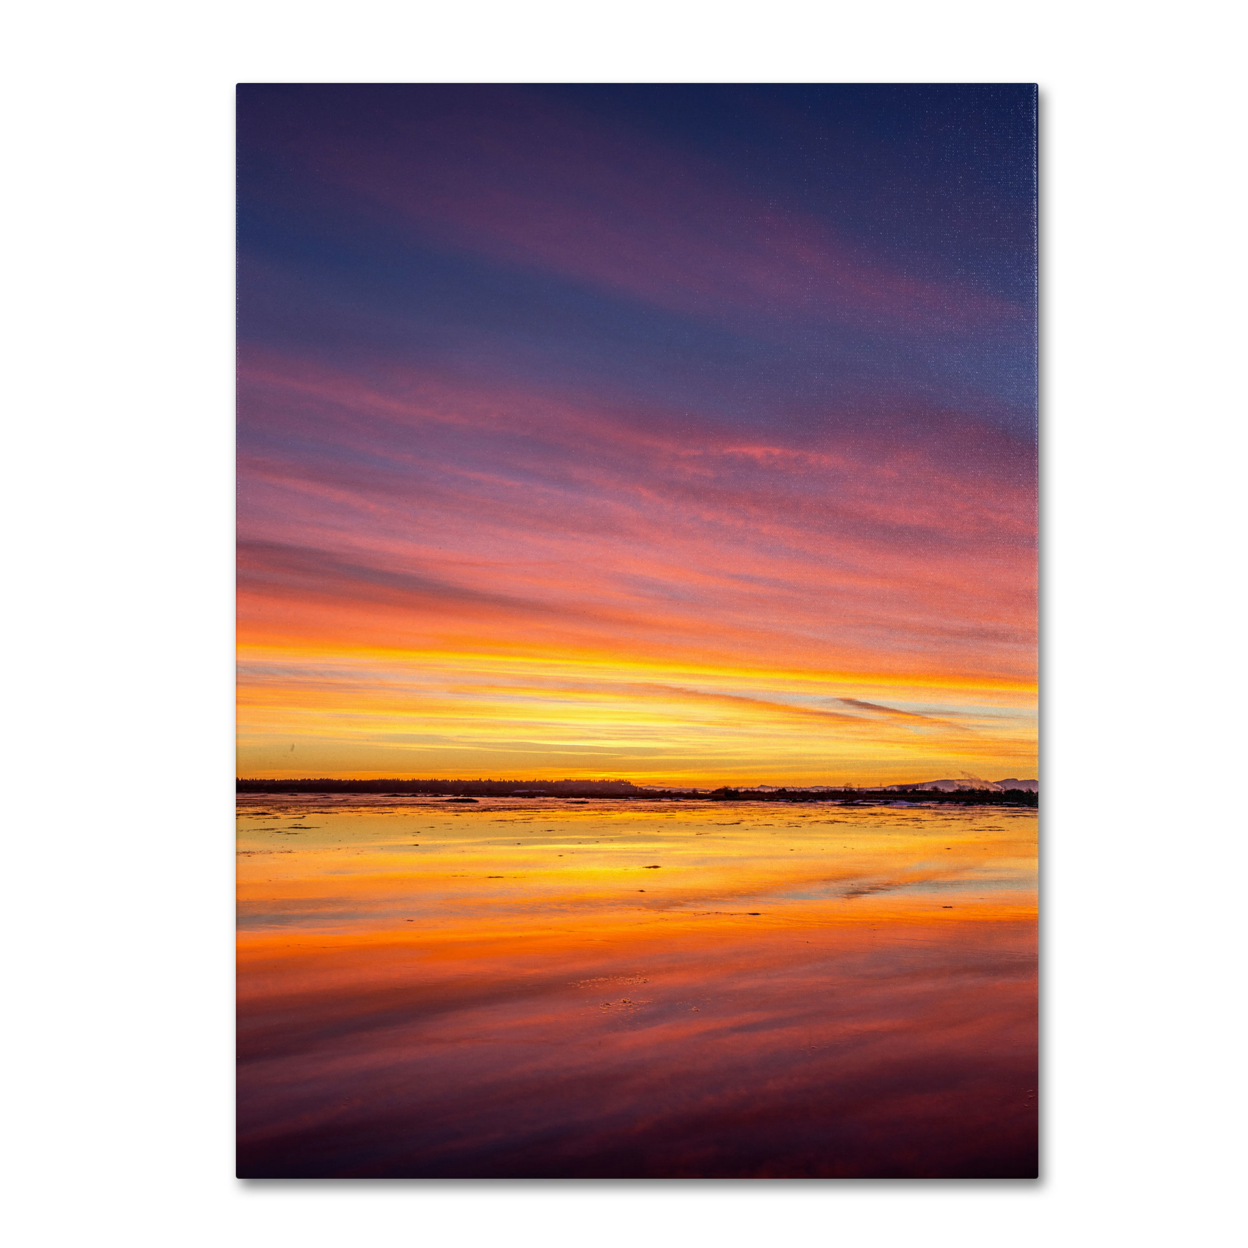 Pierre Leclerc 'Boundary Sunset' Canvas Wall Art 35 X 47 Inches